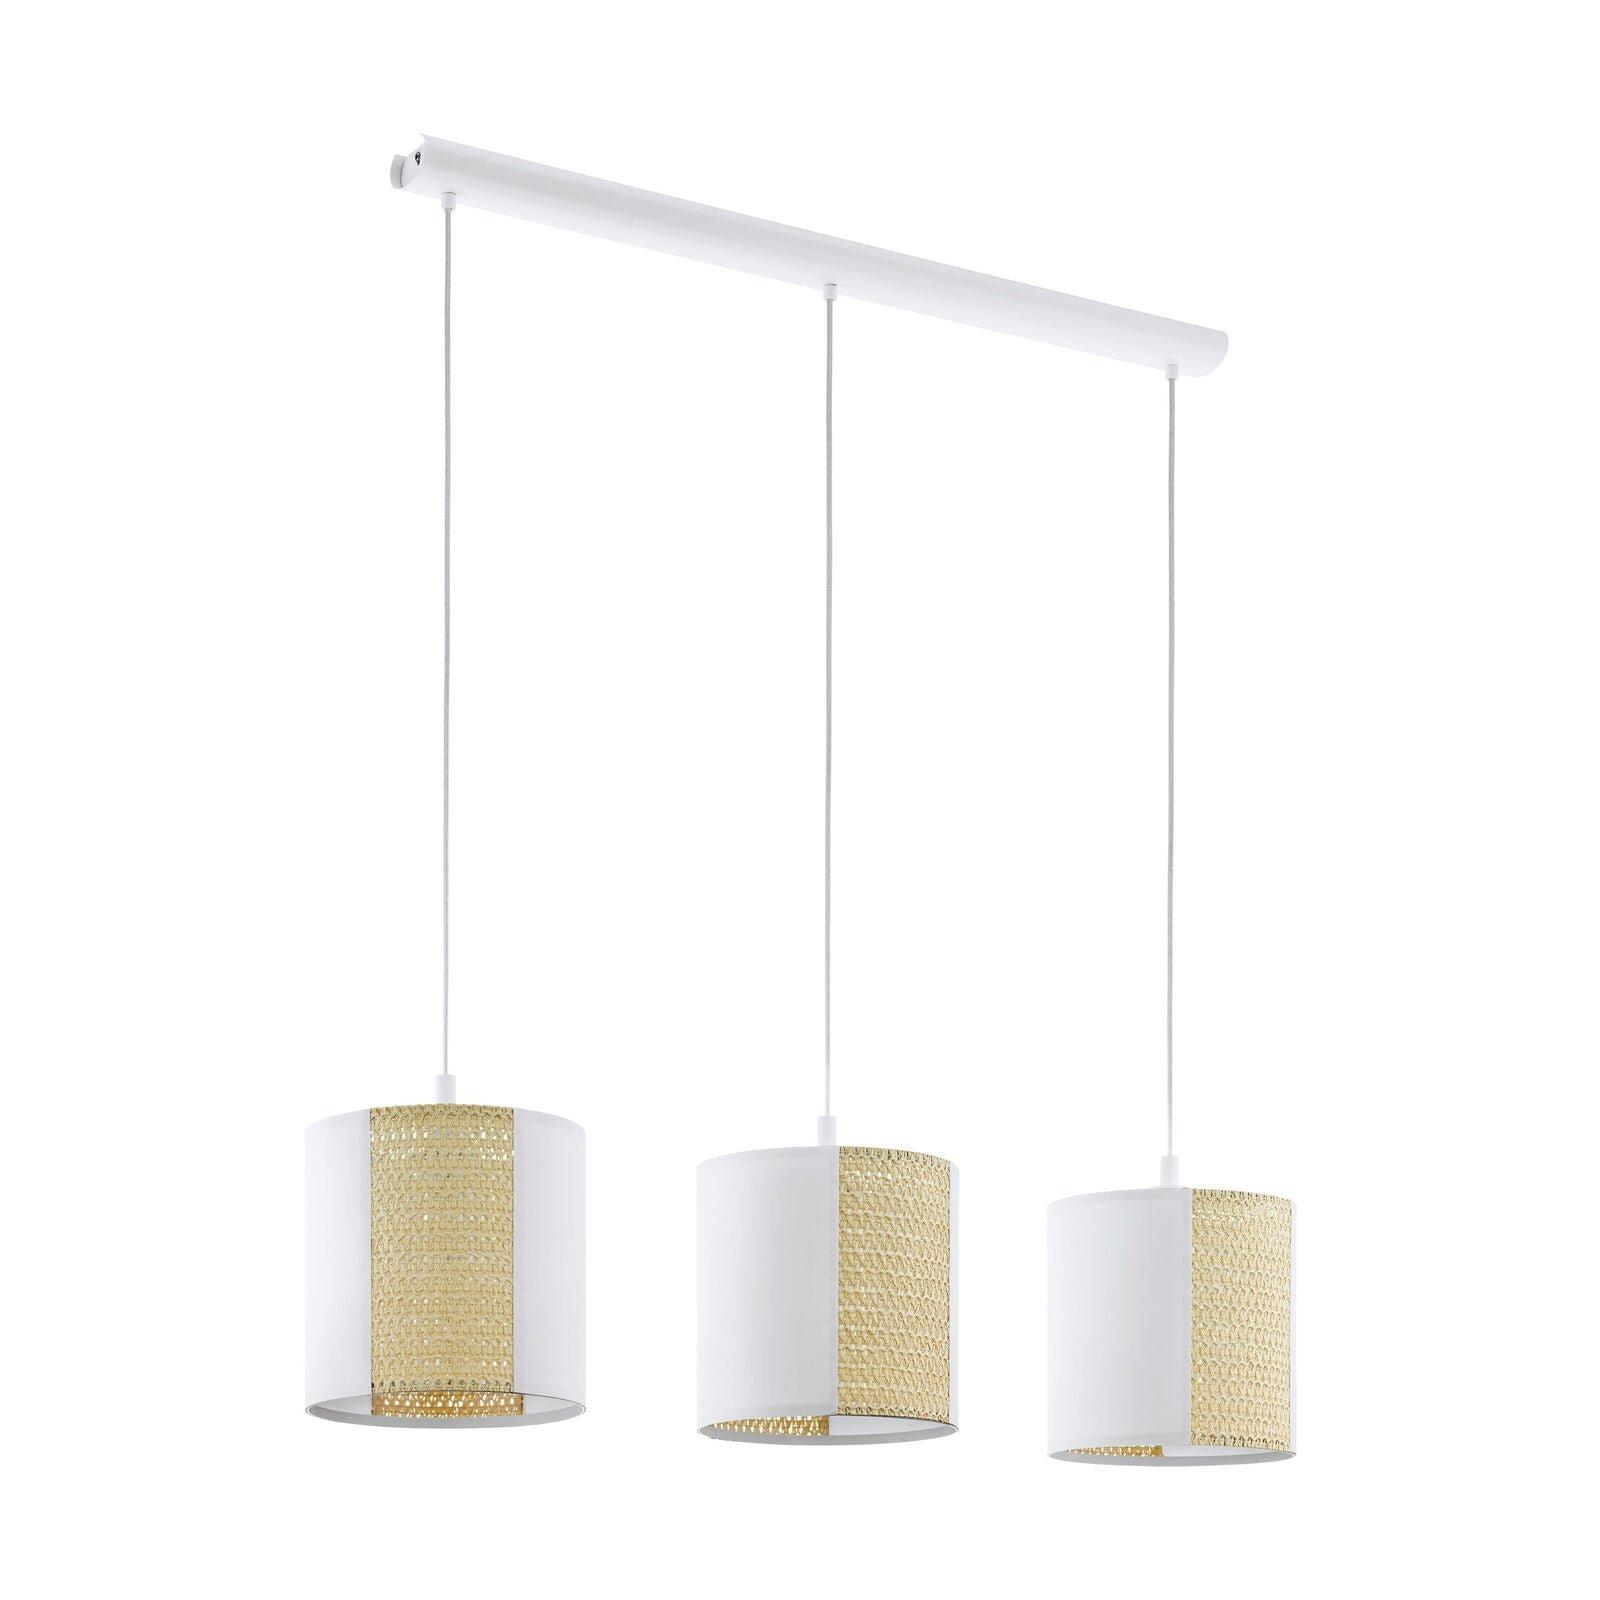 Hanging Ceiling Pendant Light White Seagrass 3x 40W E27 Hallway Feature Lamp